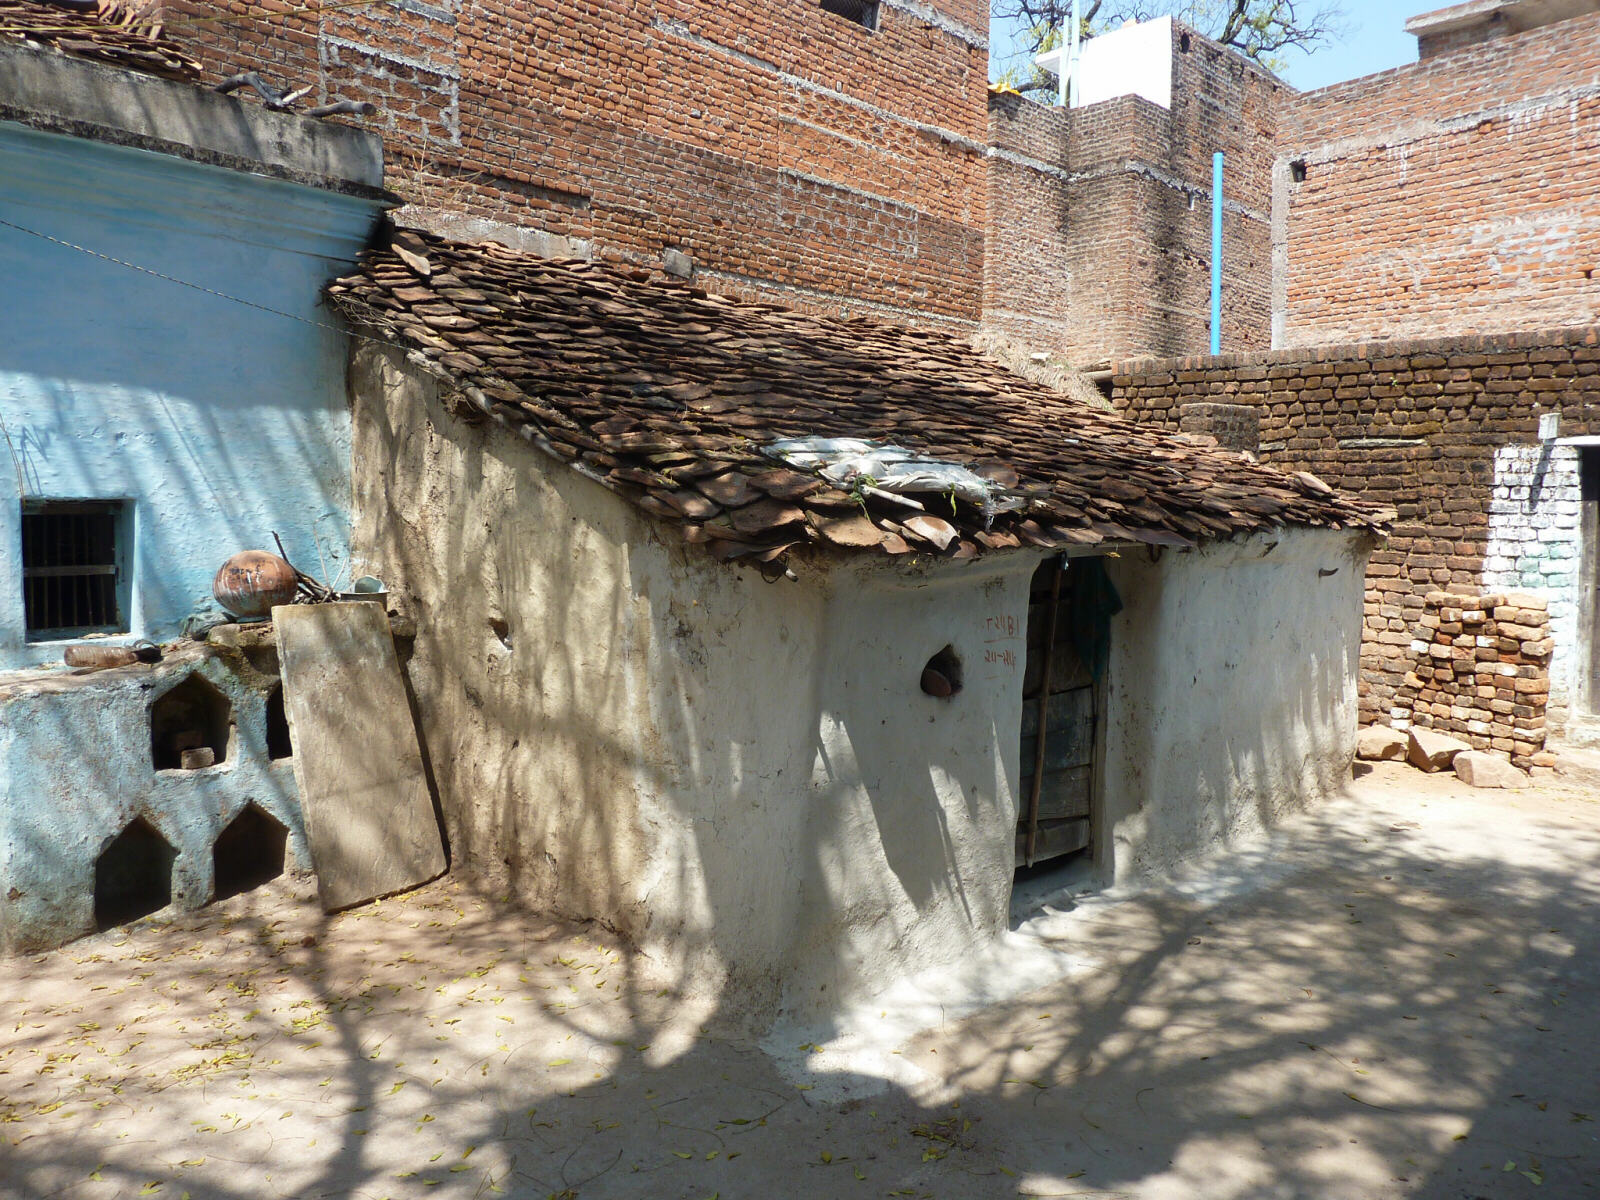 Grandmother's house in Khajuraho old town, India